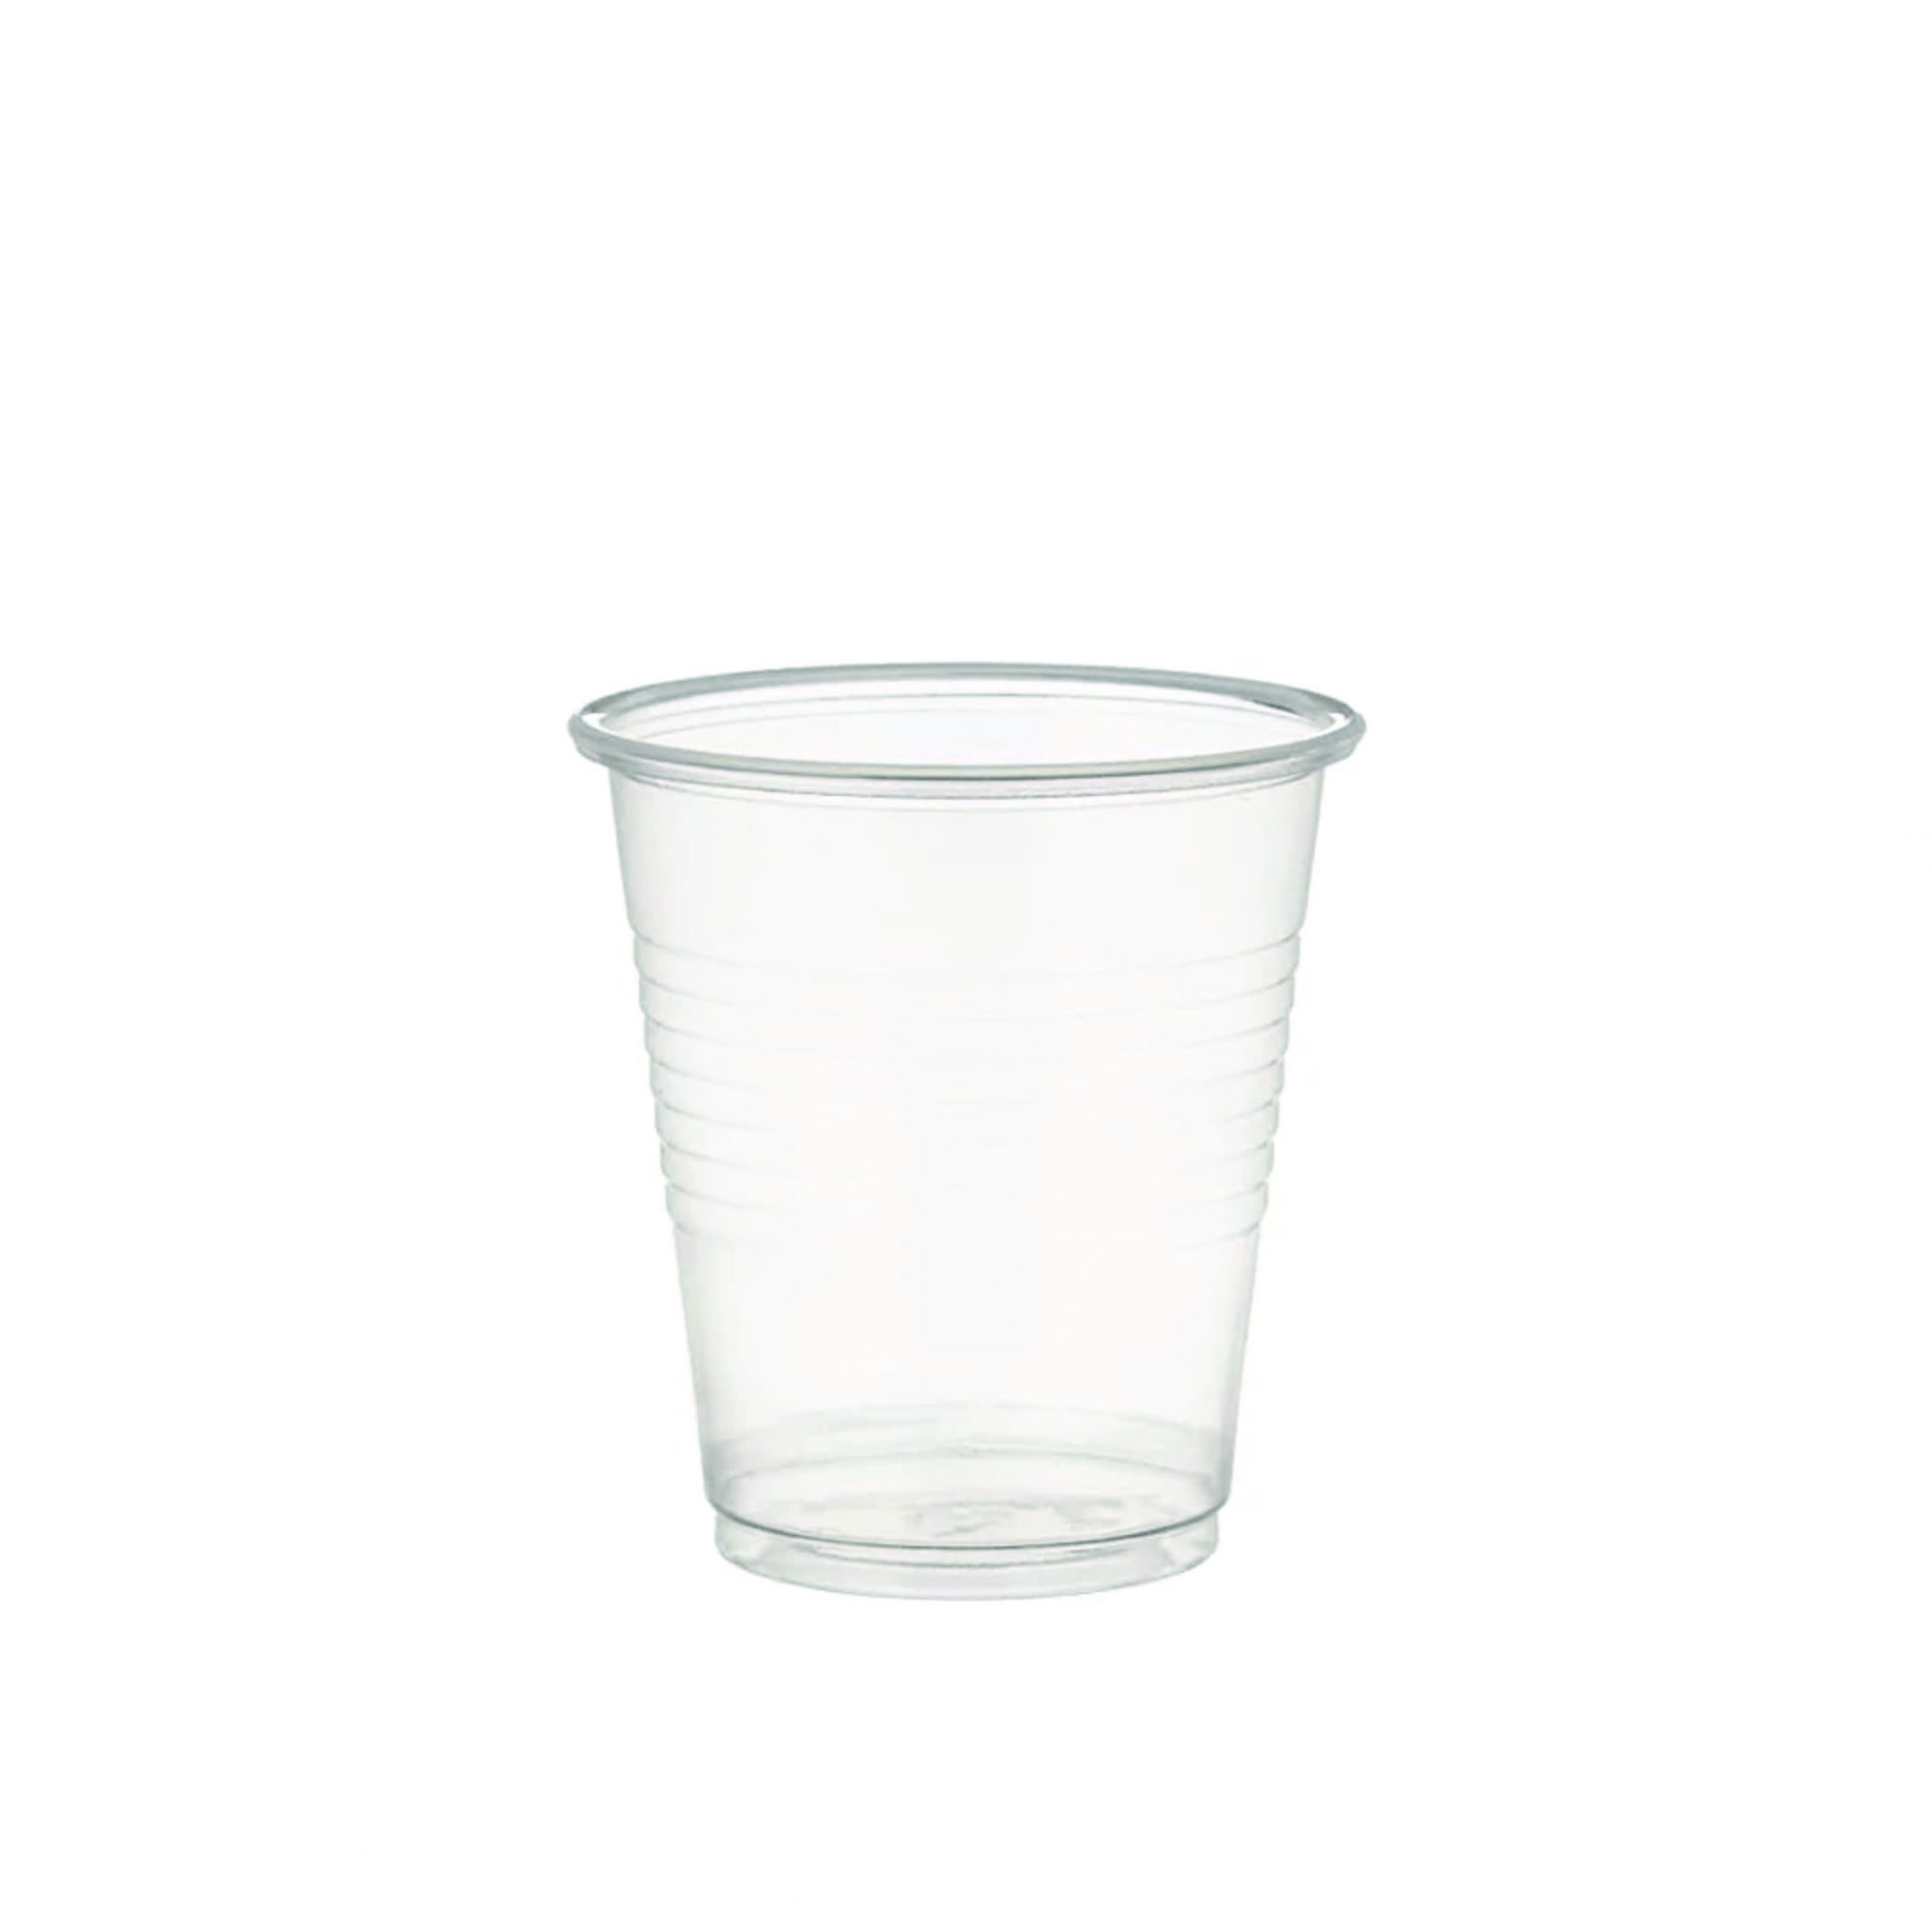 02. Plastic Cup 6 OZ clear scaled